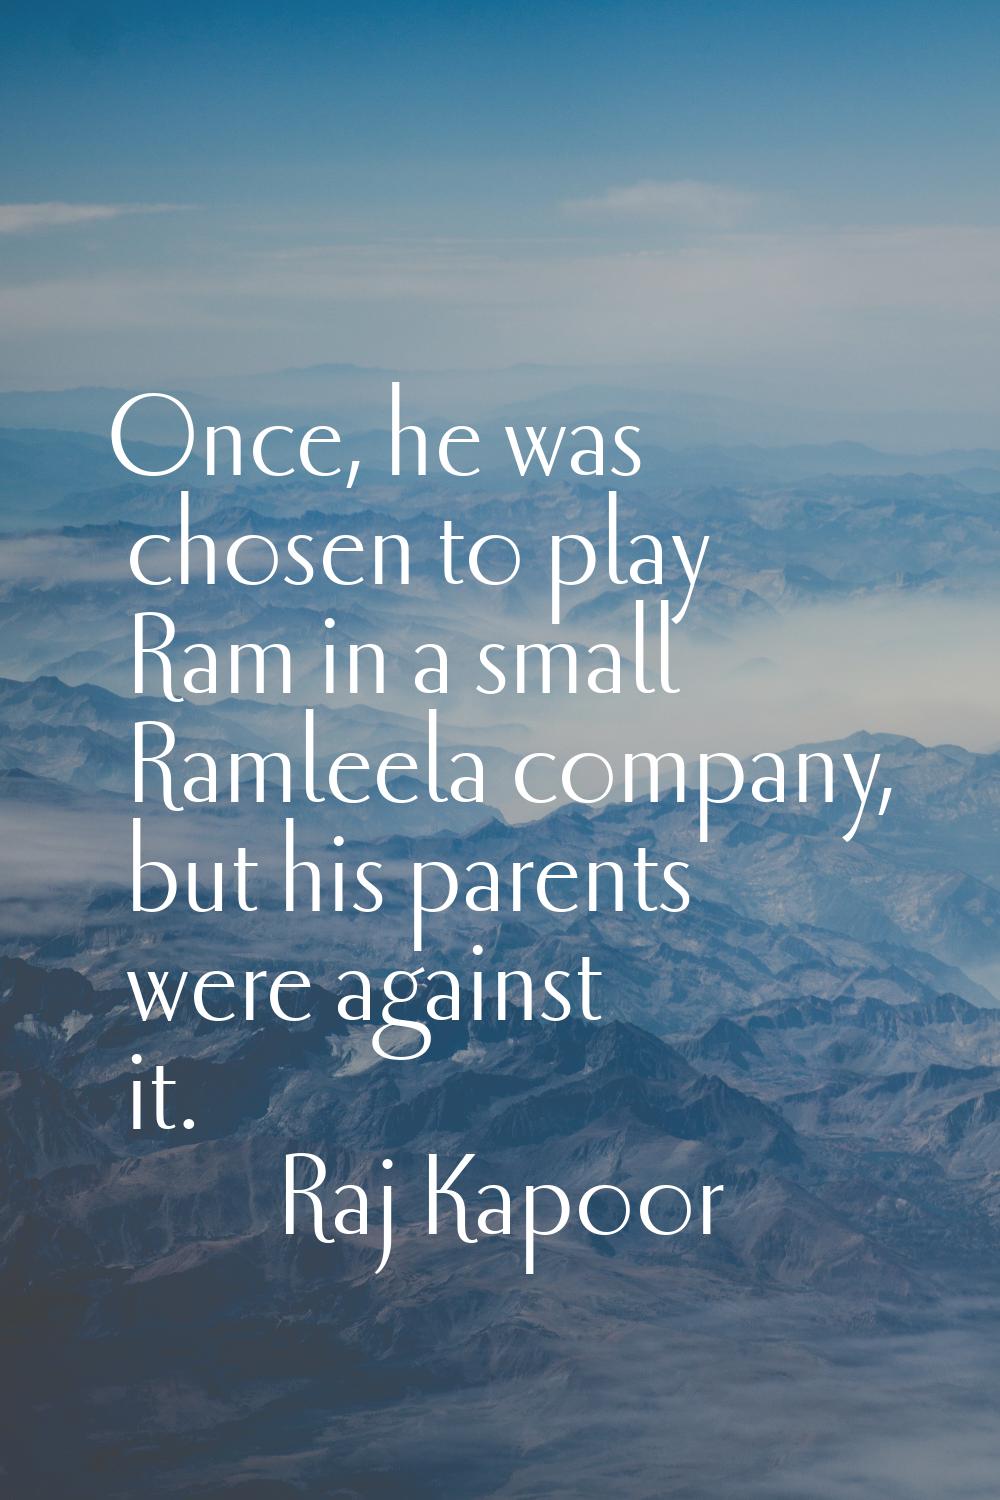 Once, he was chosen to play Ram in a small Ramleela company, but his parents were against it.